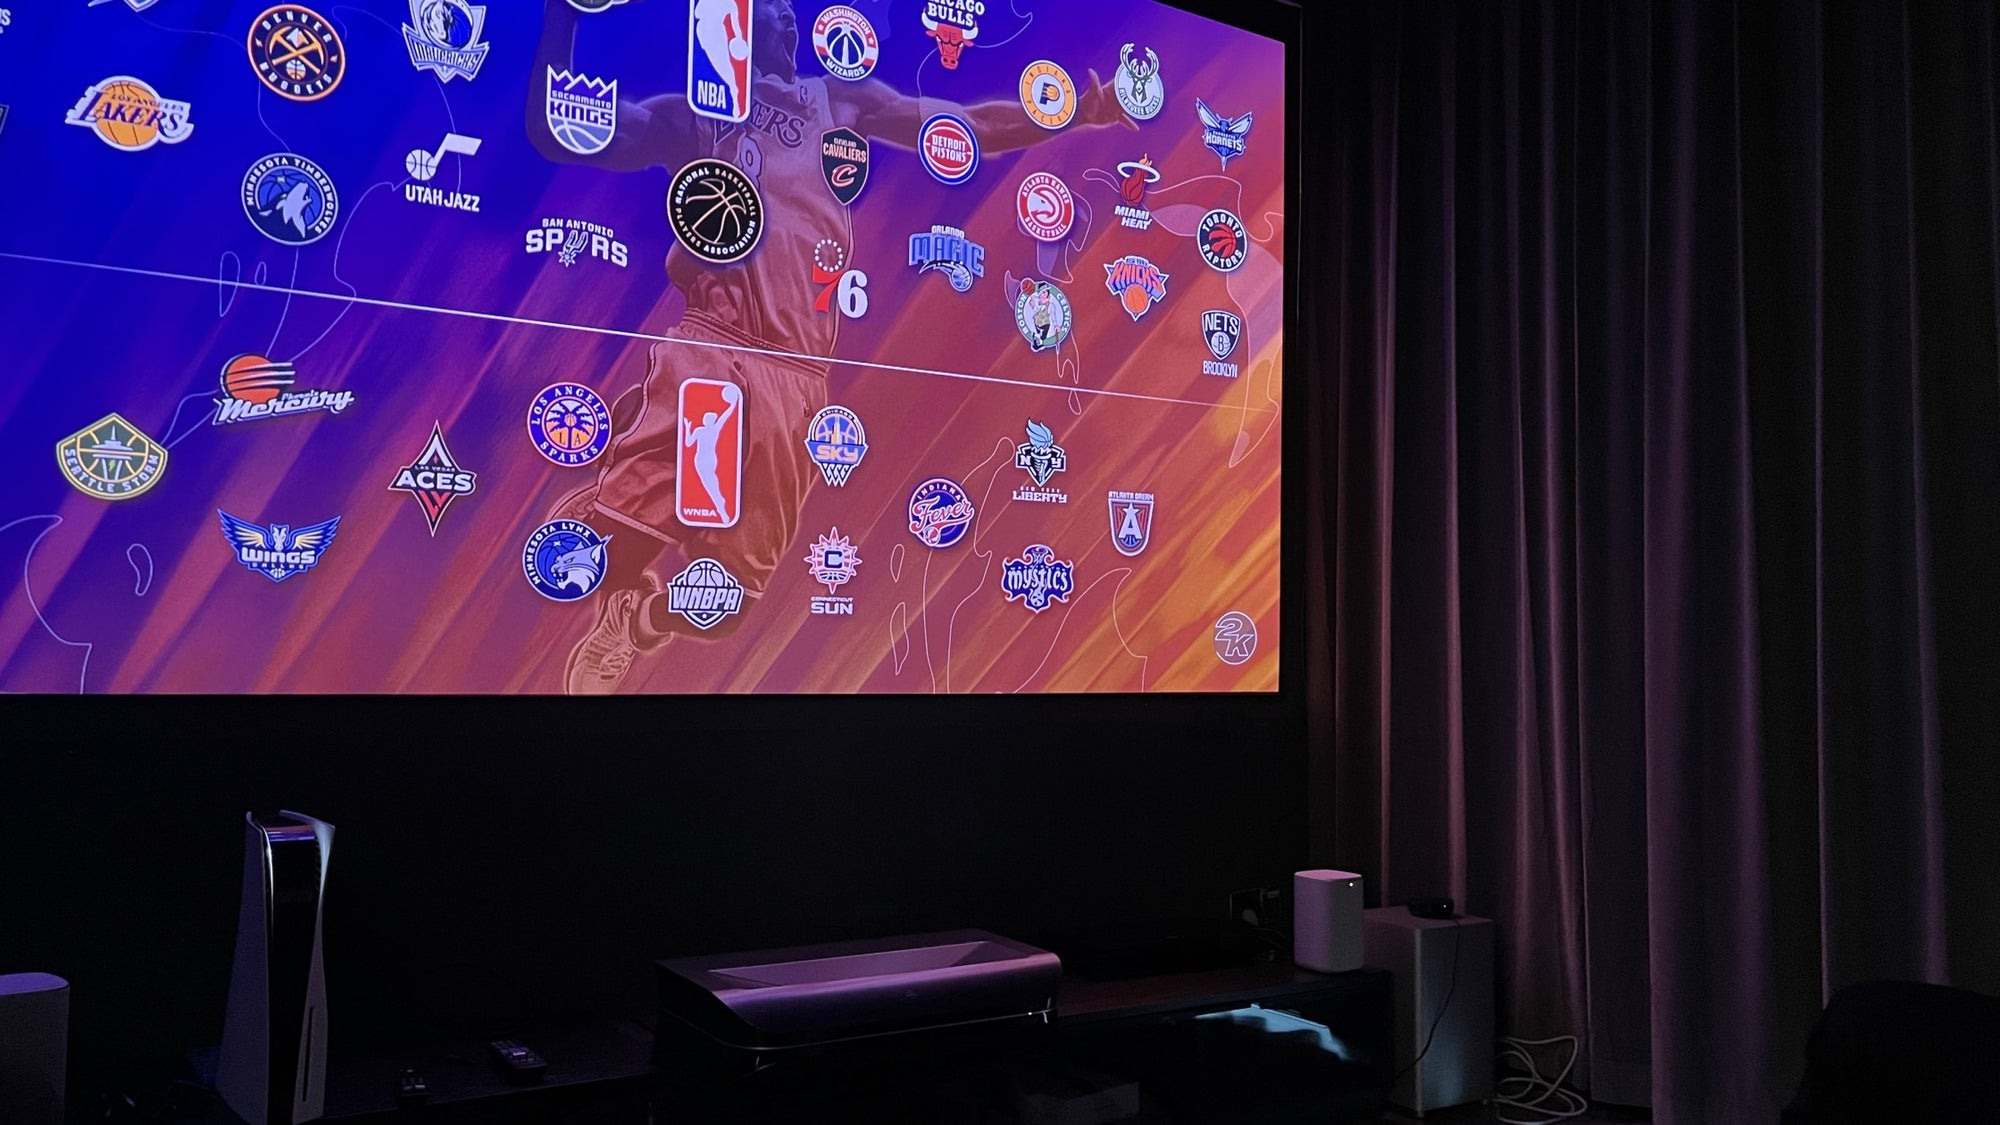 Use a projector to connect PS5 to play NBA 2K